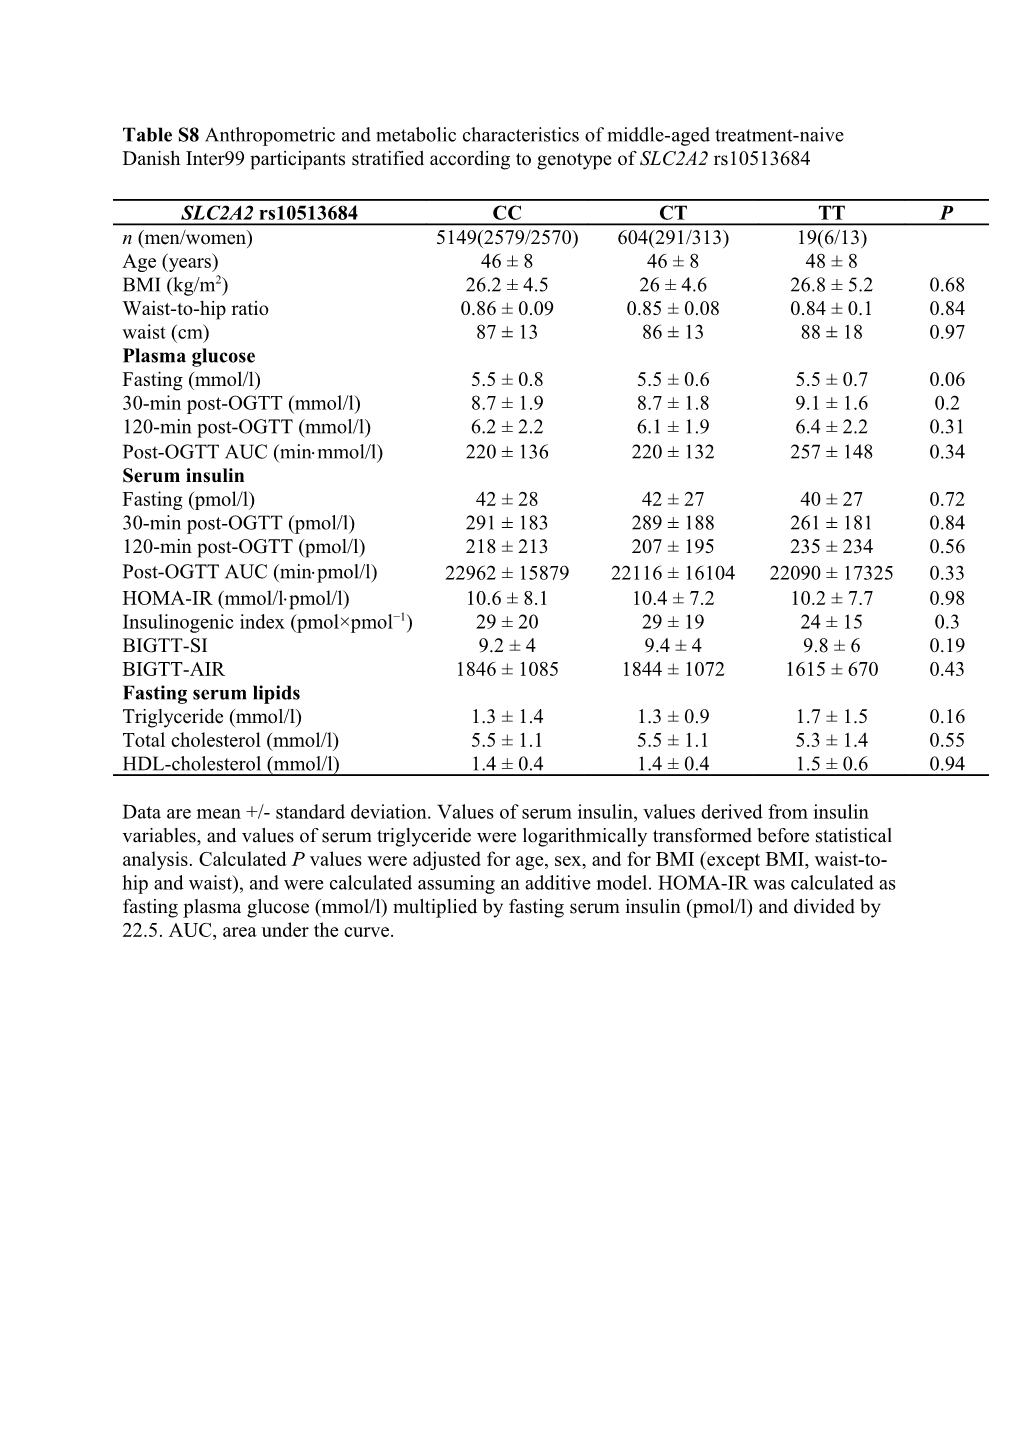 Table S7 Anthropometric and Metabolic Characteristics of Middle-Aged Treatment-Naive Danish